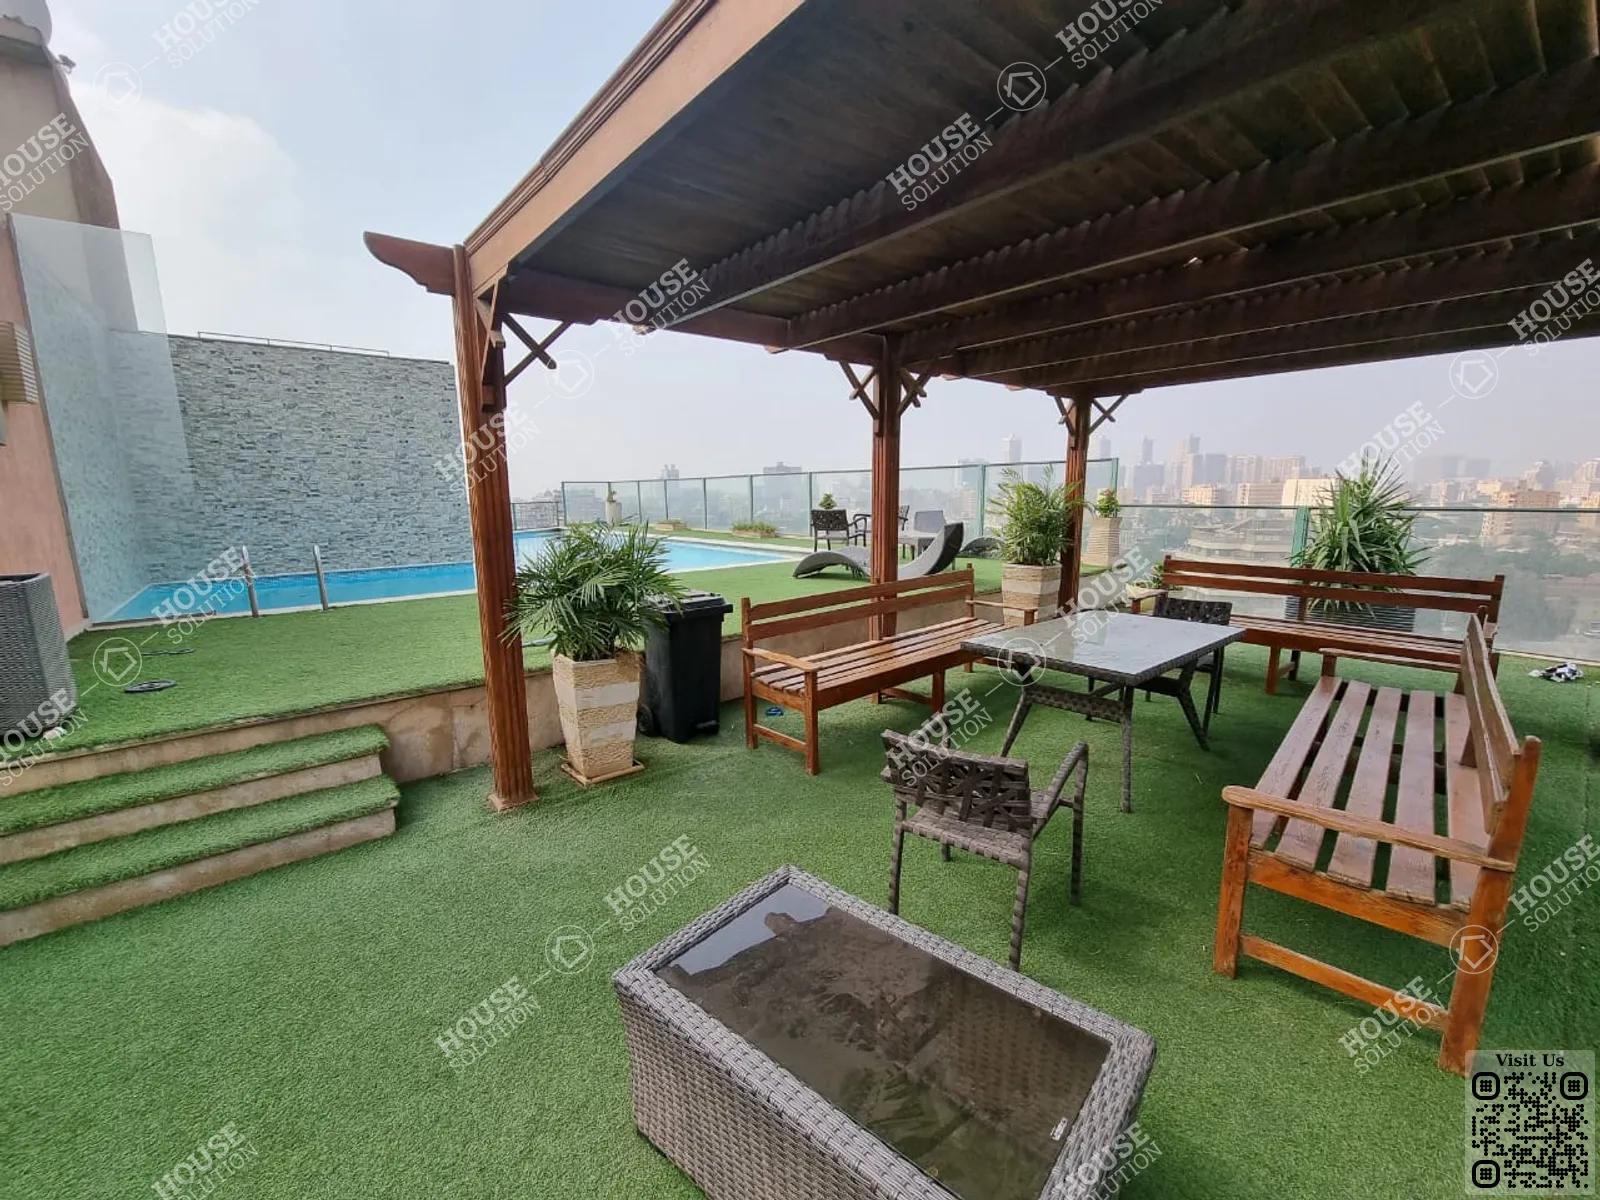 SHARED TERRACE  @ Apartments For Rent In Maadi Maadi Sarayat Area: 180 m² consists of 3 Bedrooms 3 Bathrooms Modern furnished 5 stars #5643-1